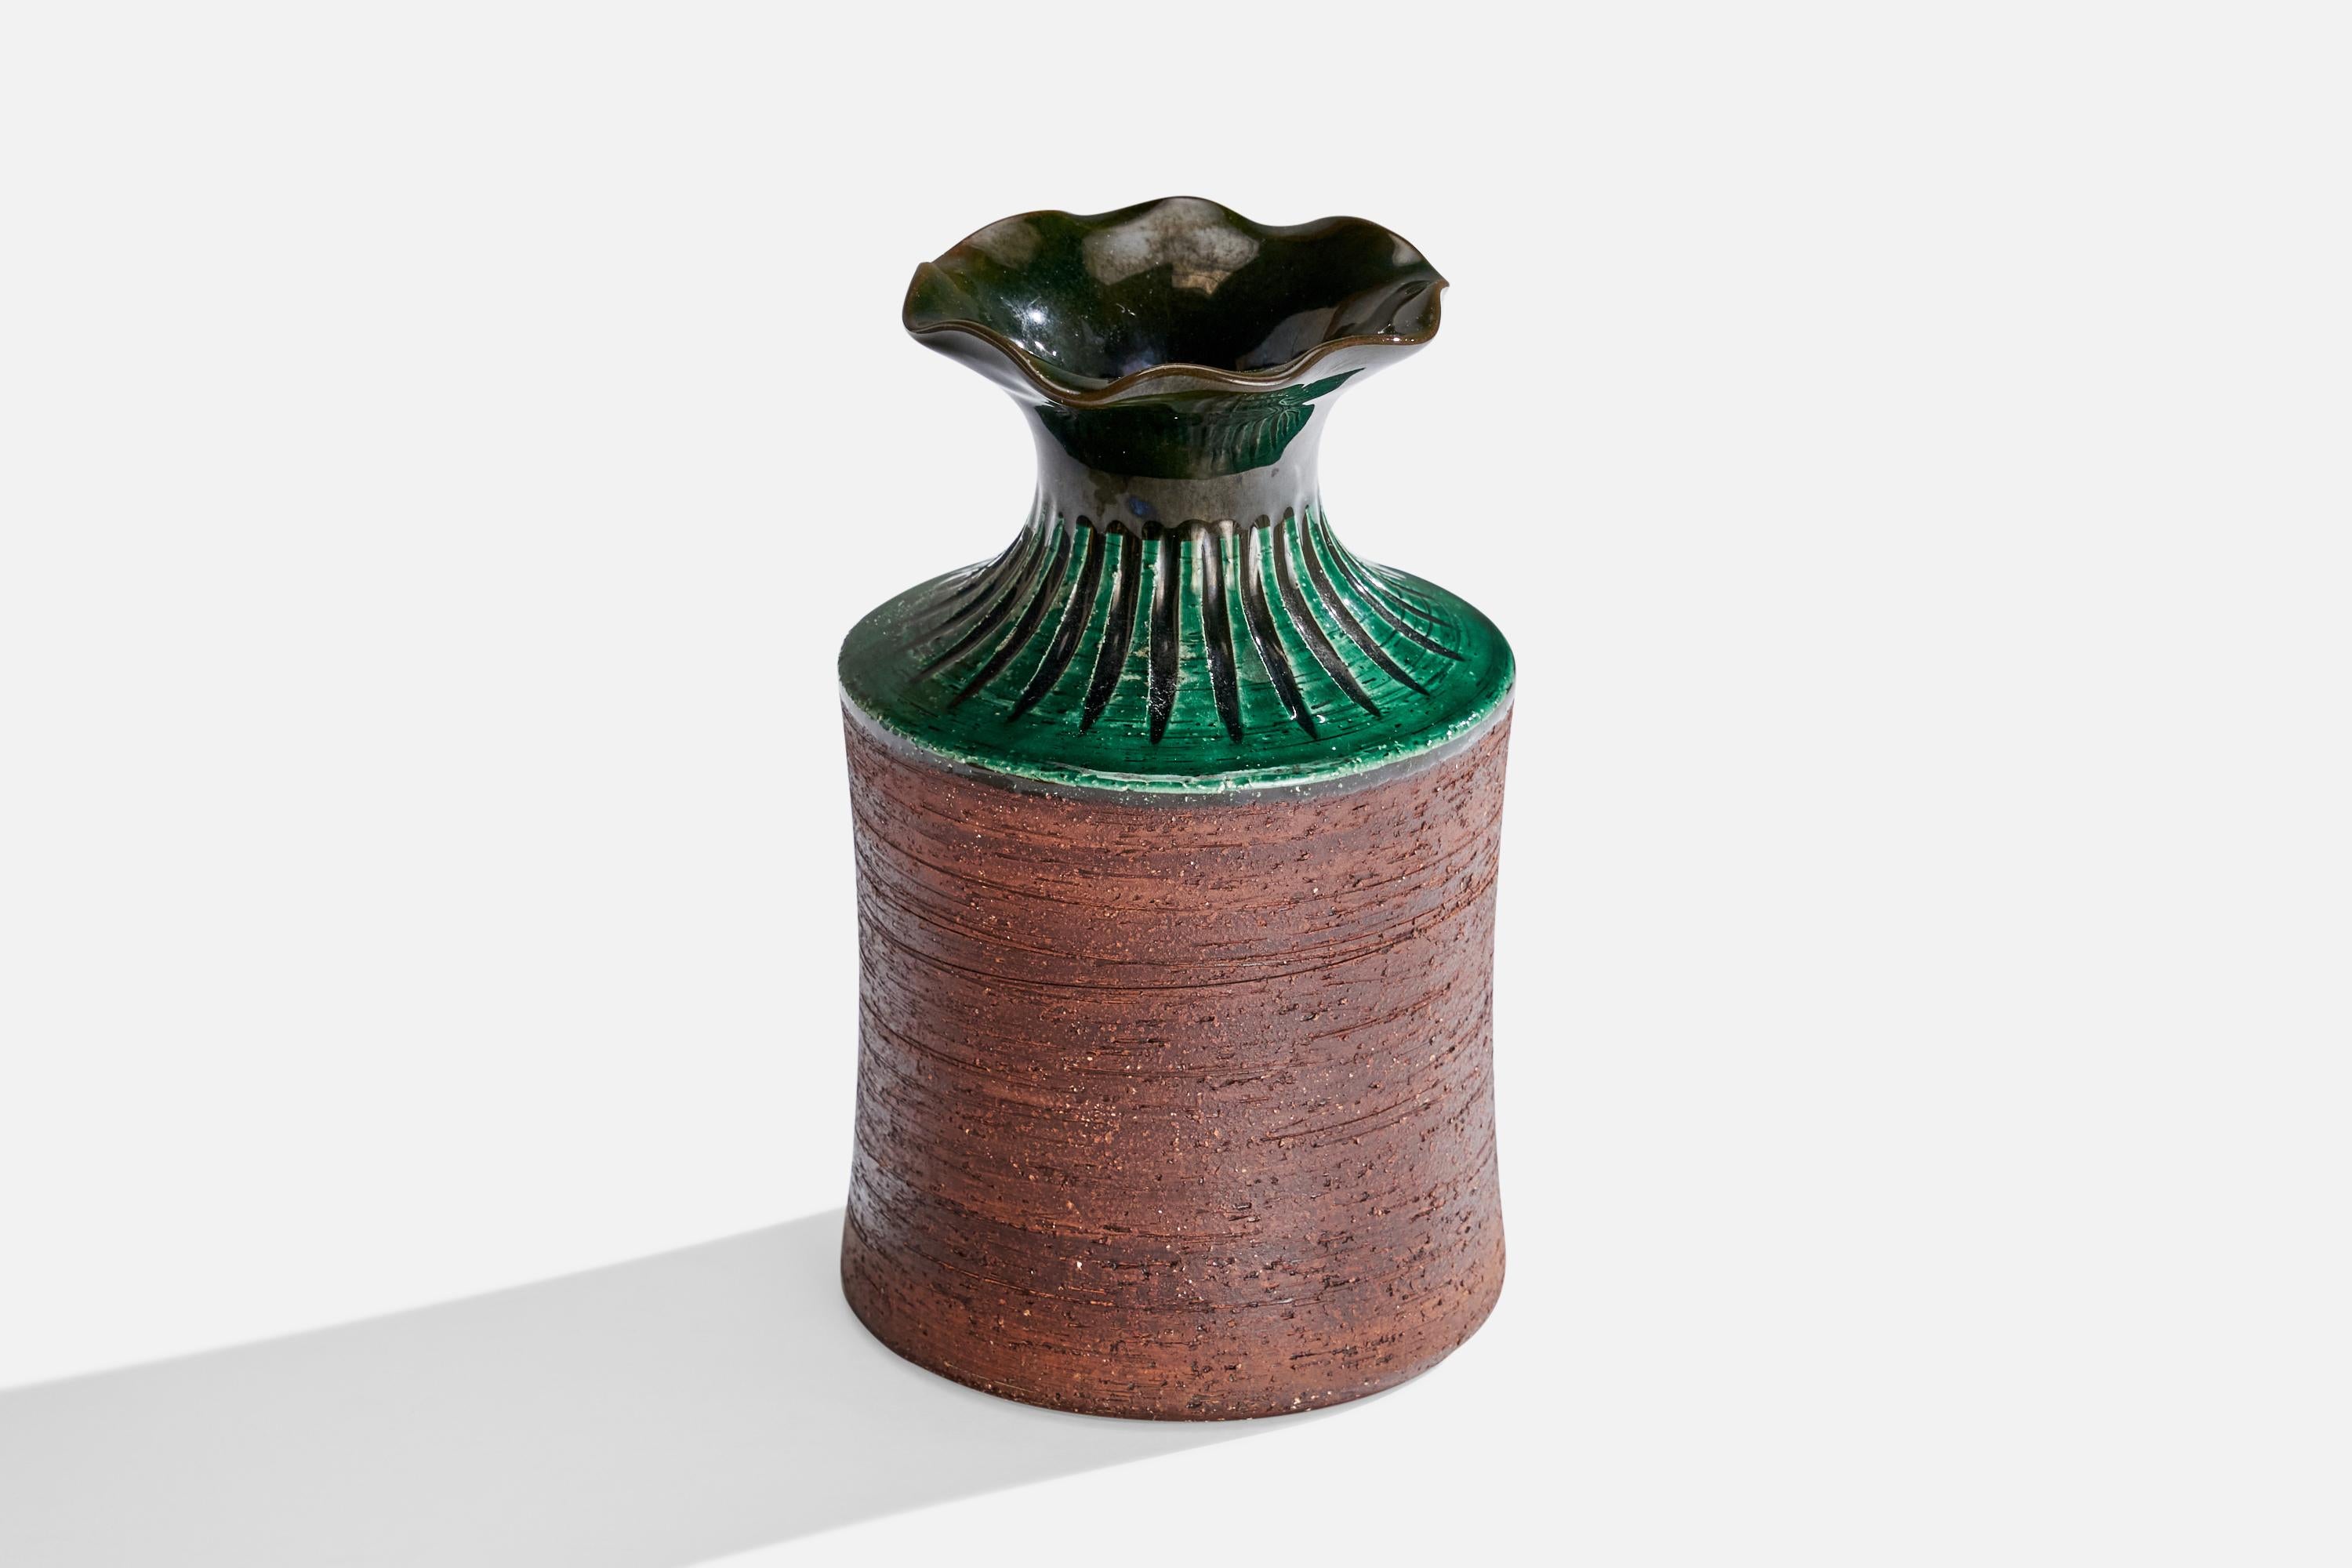 A green and brown-glazed earthenware vase designed and produced by Gabriel Keramik, Sweden, c. 1950s.